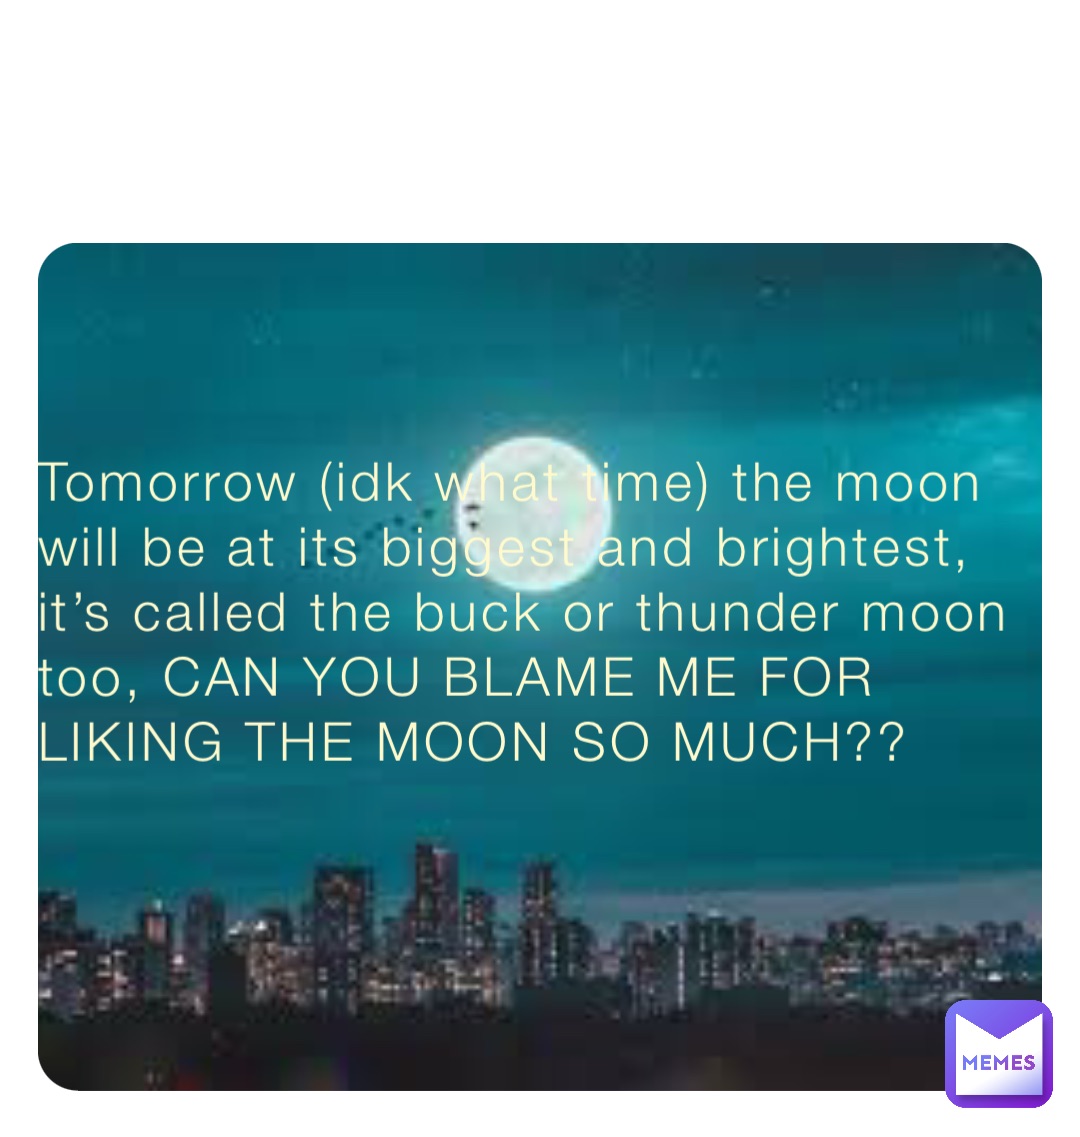 Tomorrow (idk what time) the moon will be at its biggest and brightest, it’s called the buck or thunder moon too, CAN YOU BLAME ME FOR LIKING THE MOON SO MUCH??